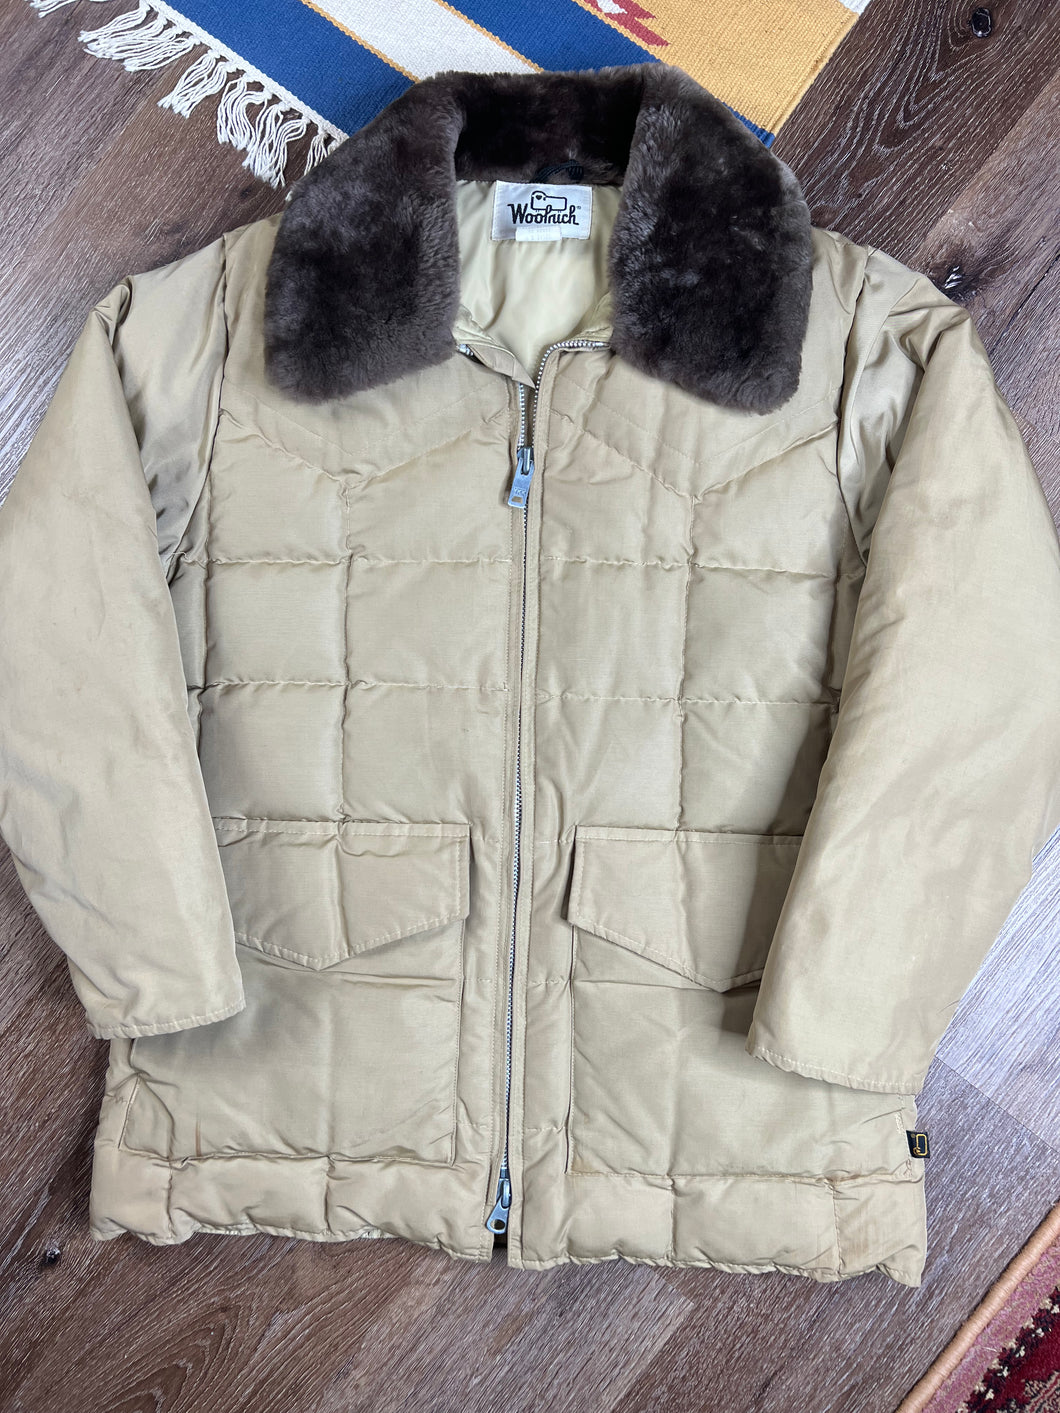 Vintage 70s Woolrich Quilted Jacket (L)